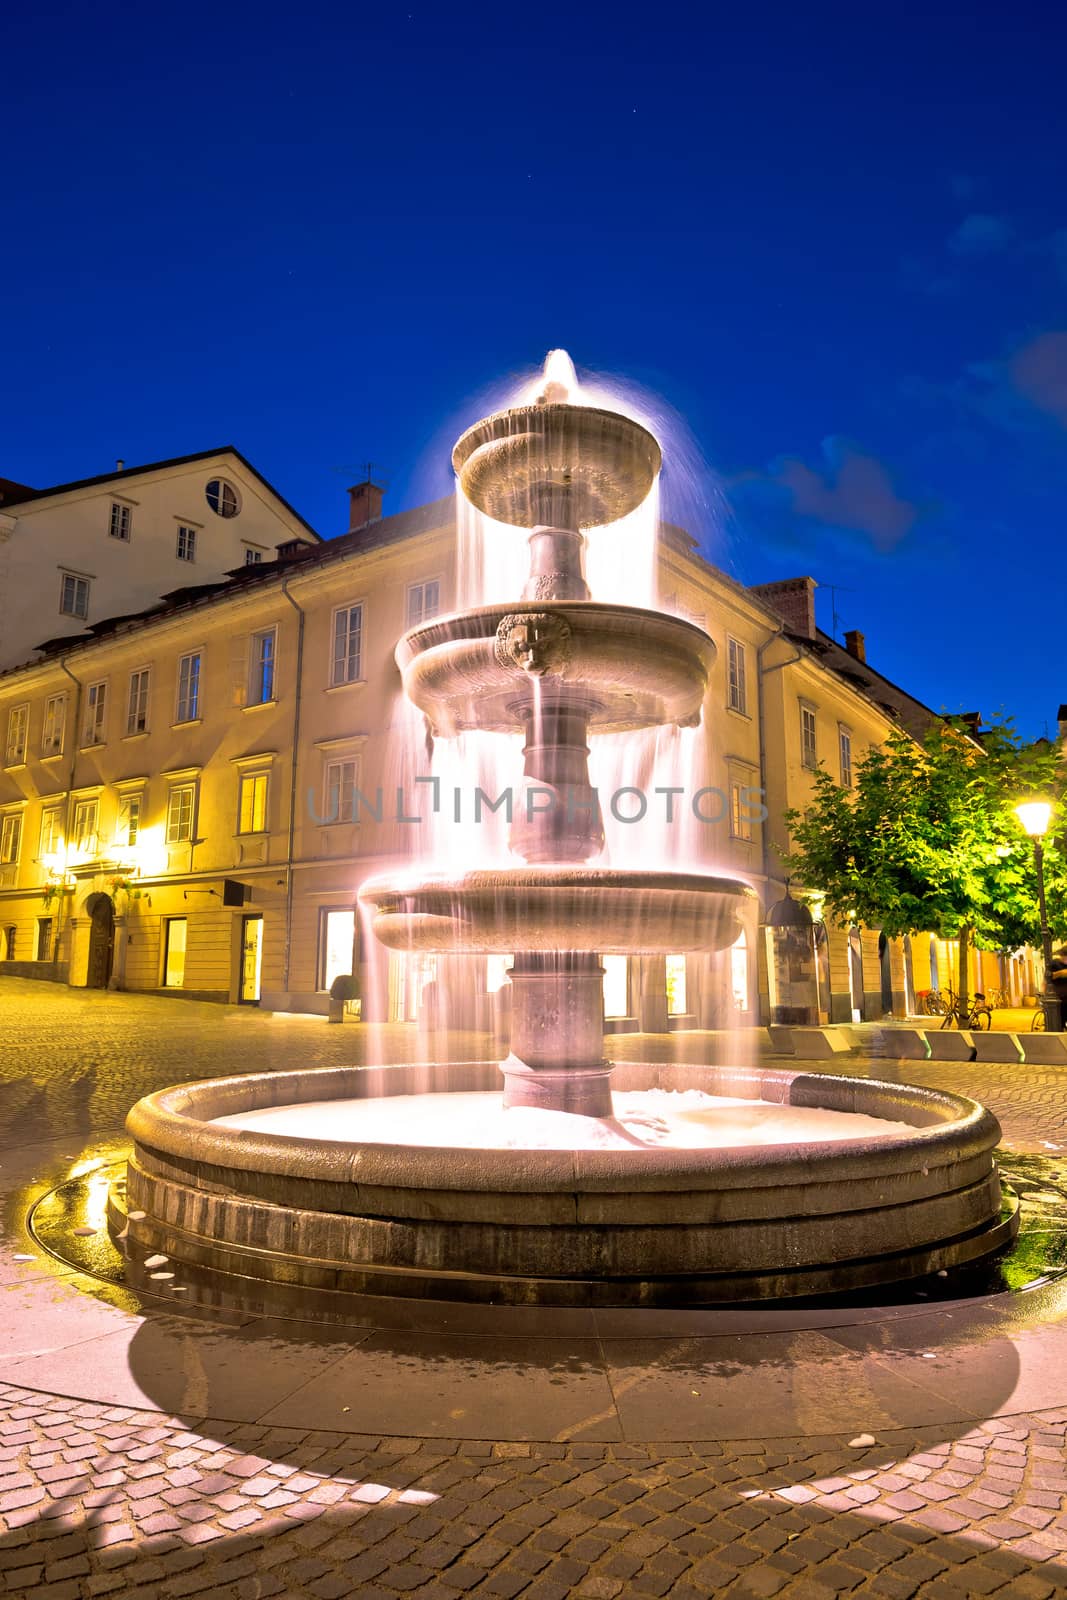 Ljubljana fountain and square evening view by xbrchx